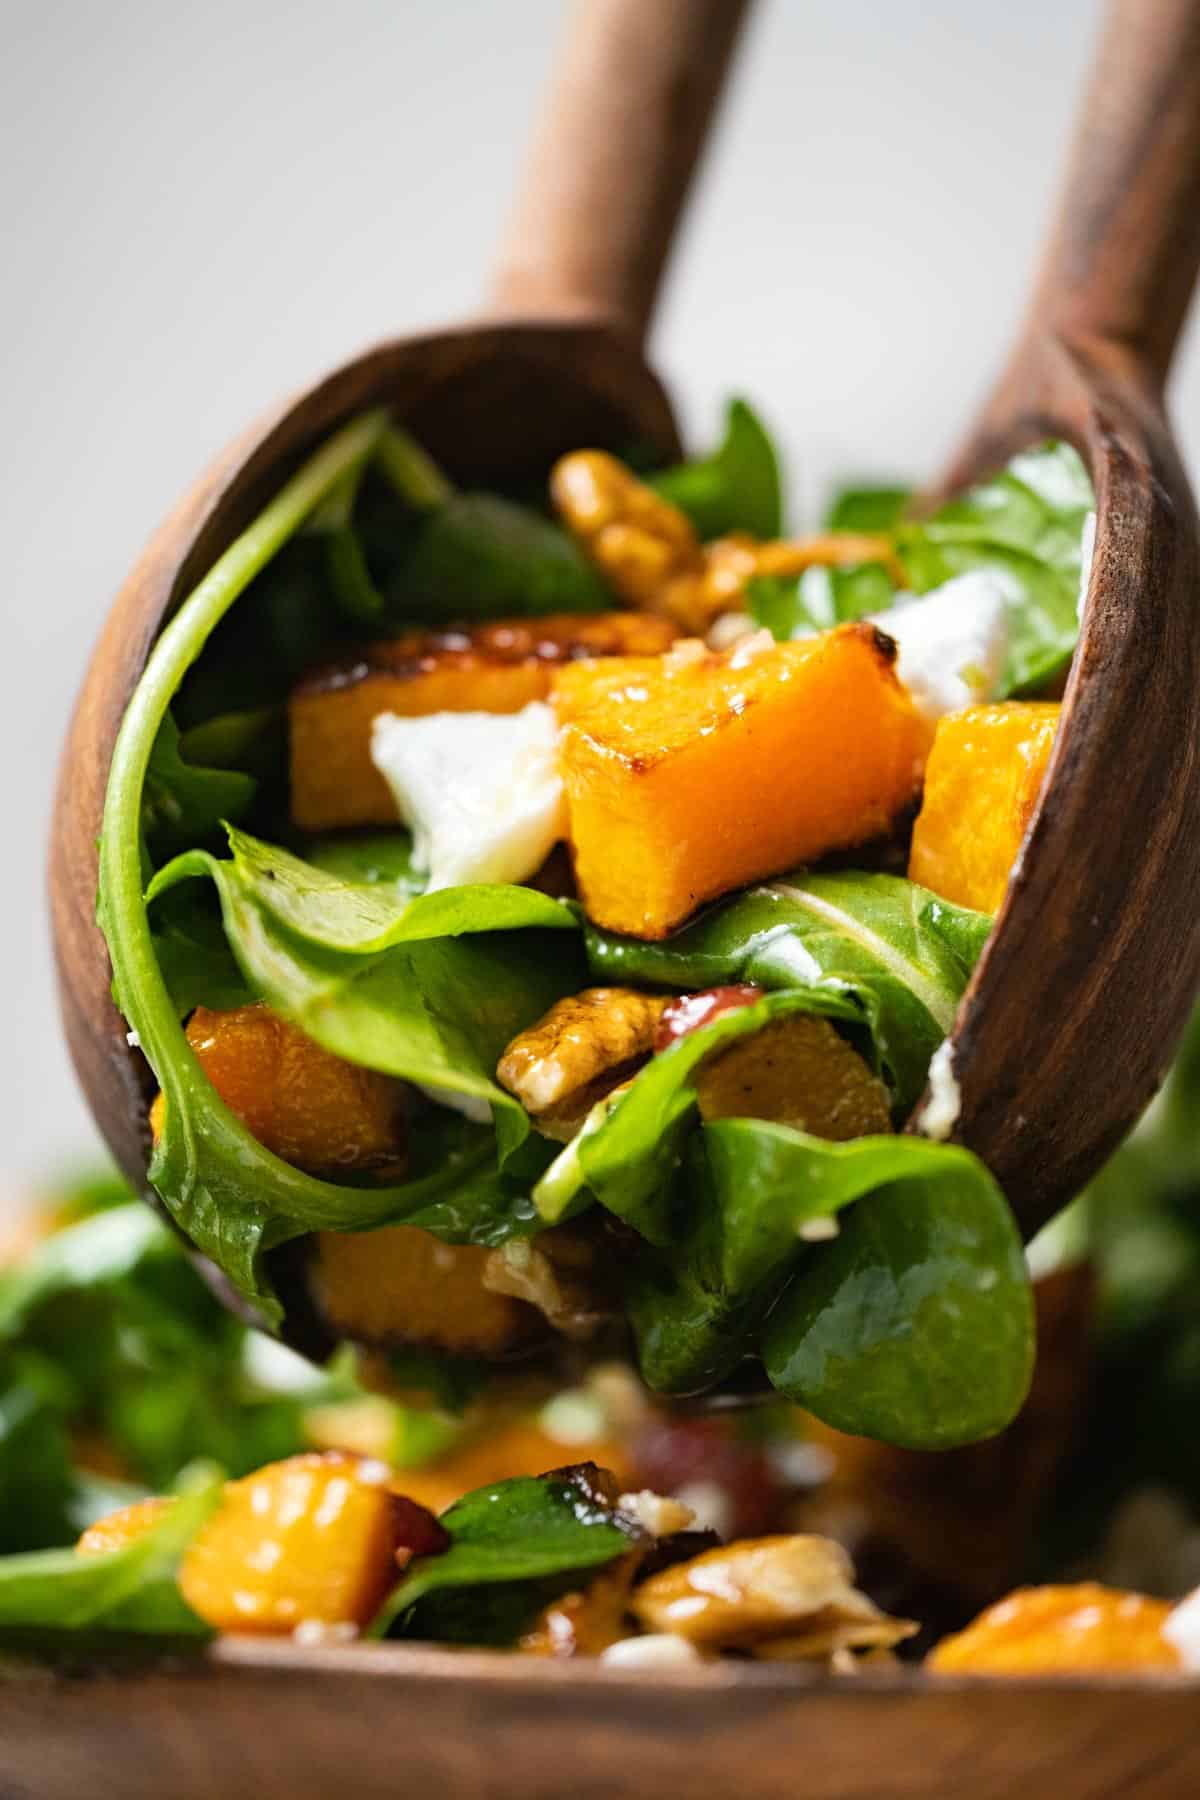 Wooden salad spoons lifting up a serving of butternut squash salad.